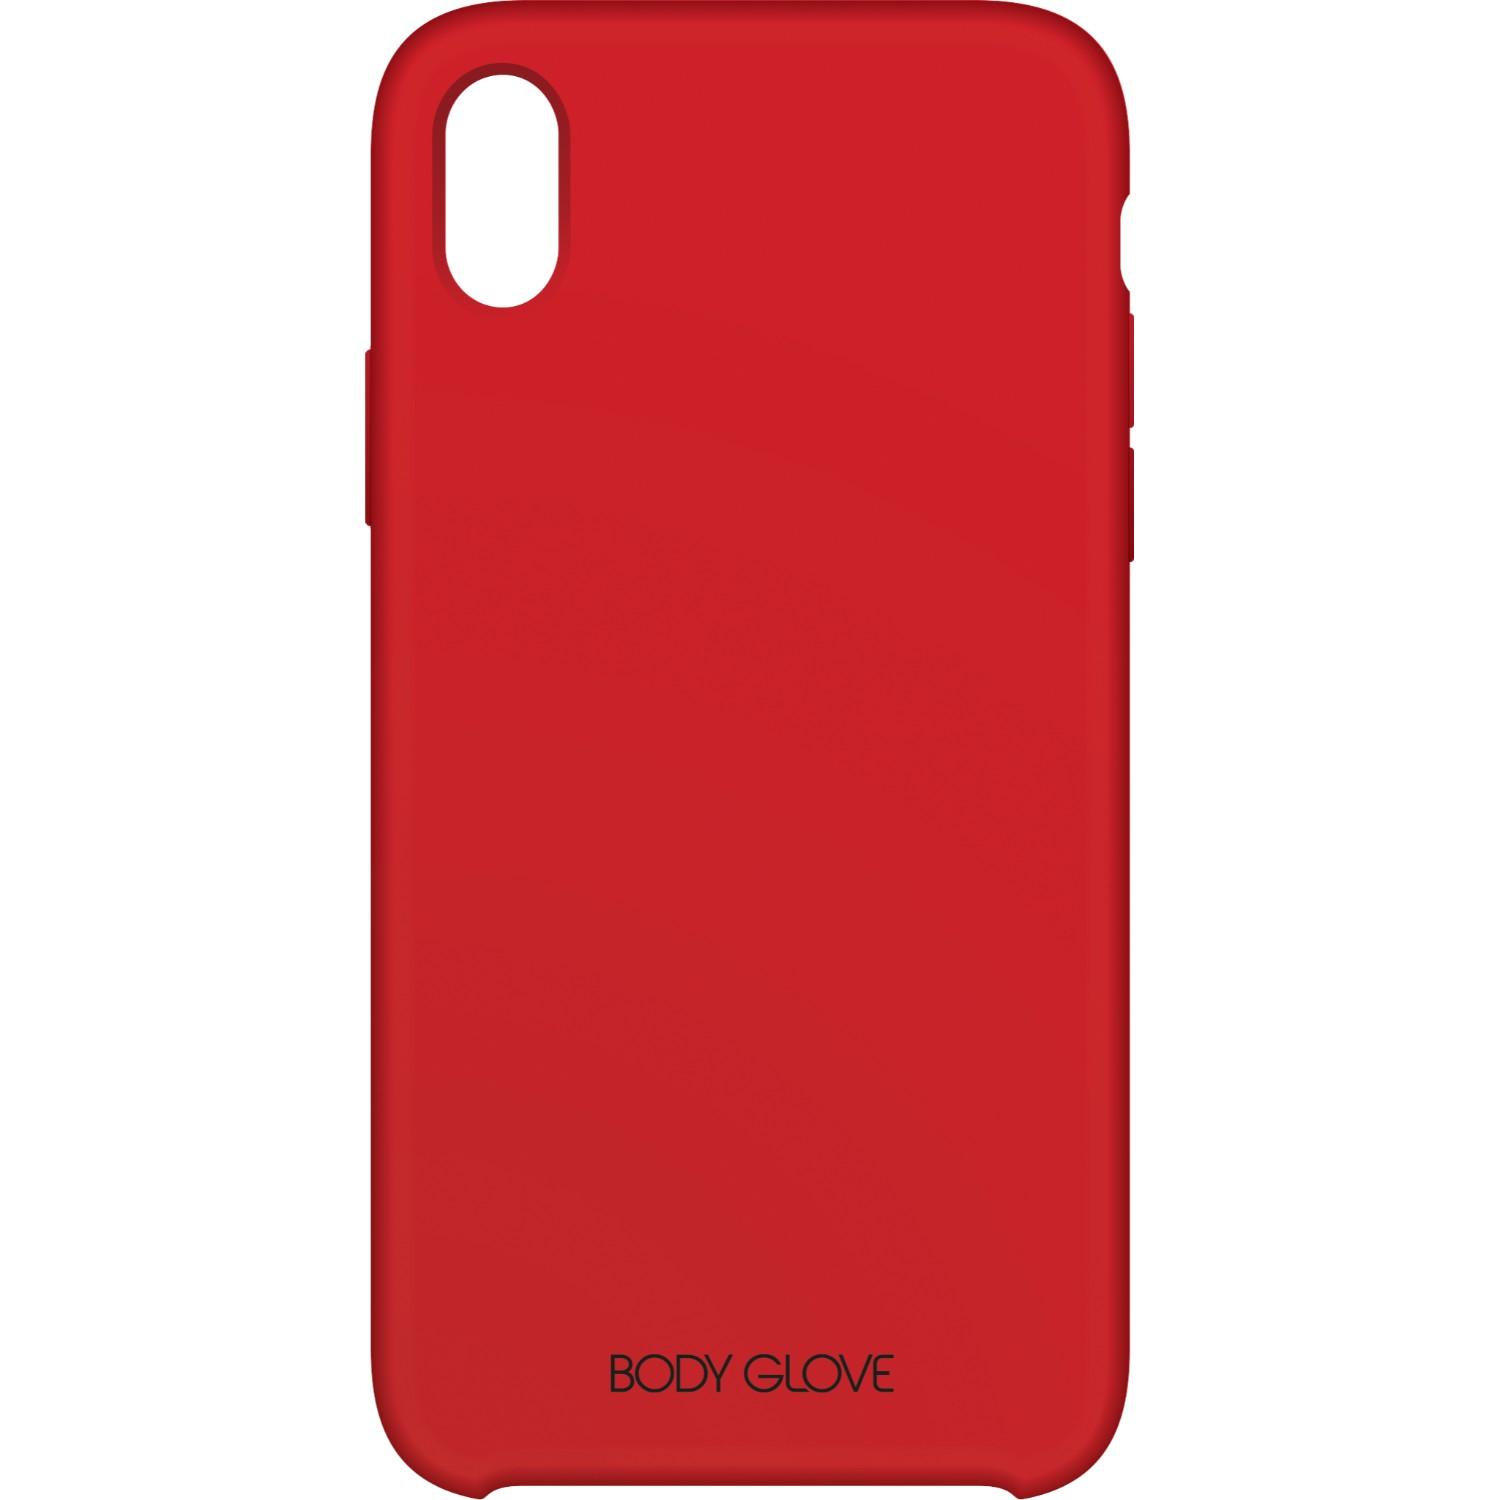 Body Glove Silk Case for Apple iPhone XS Max - Red